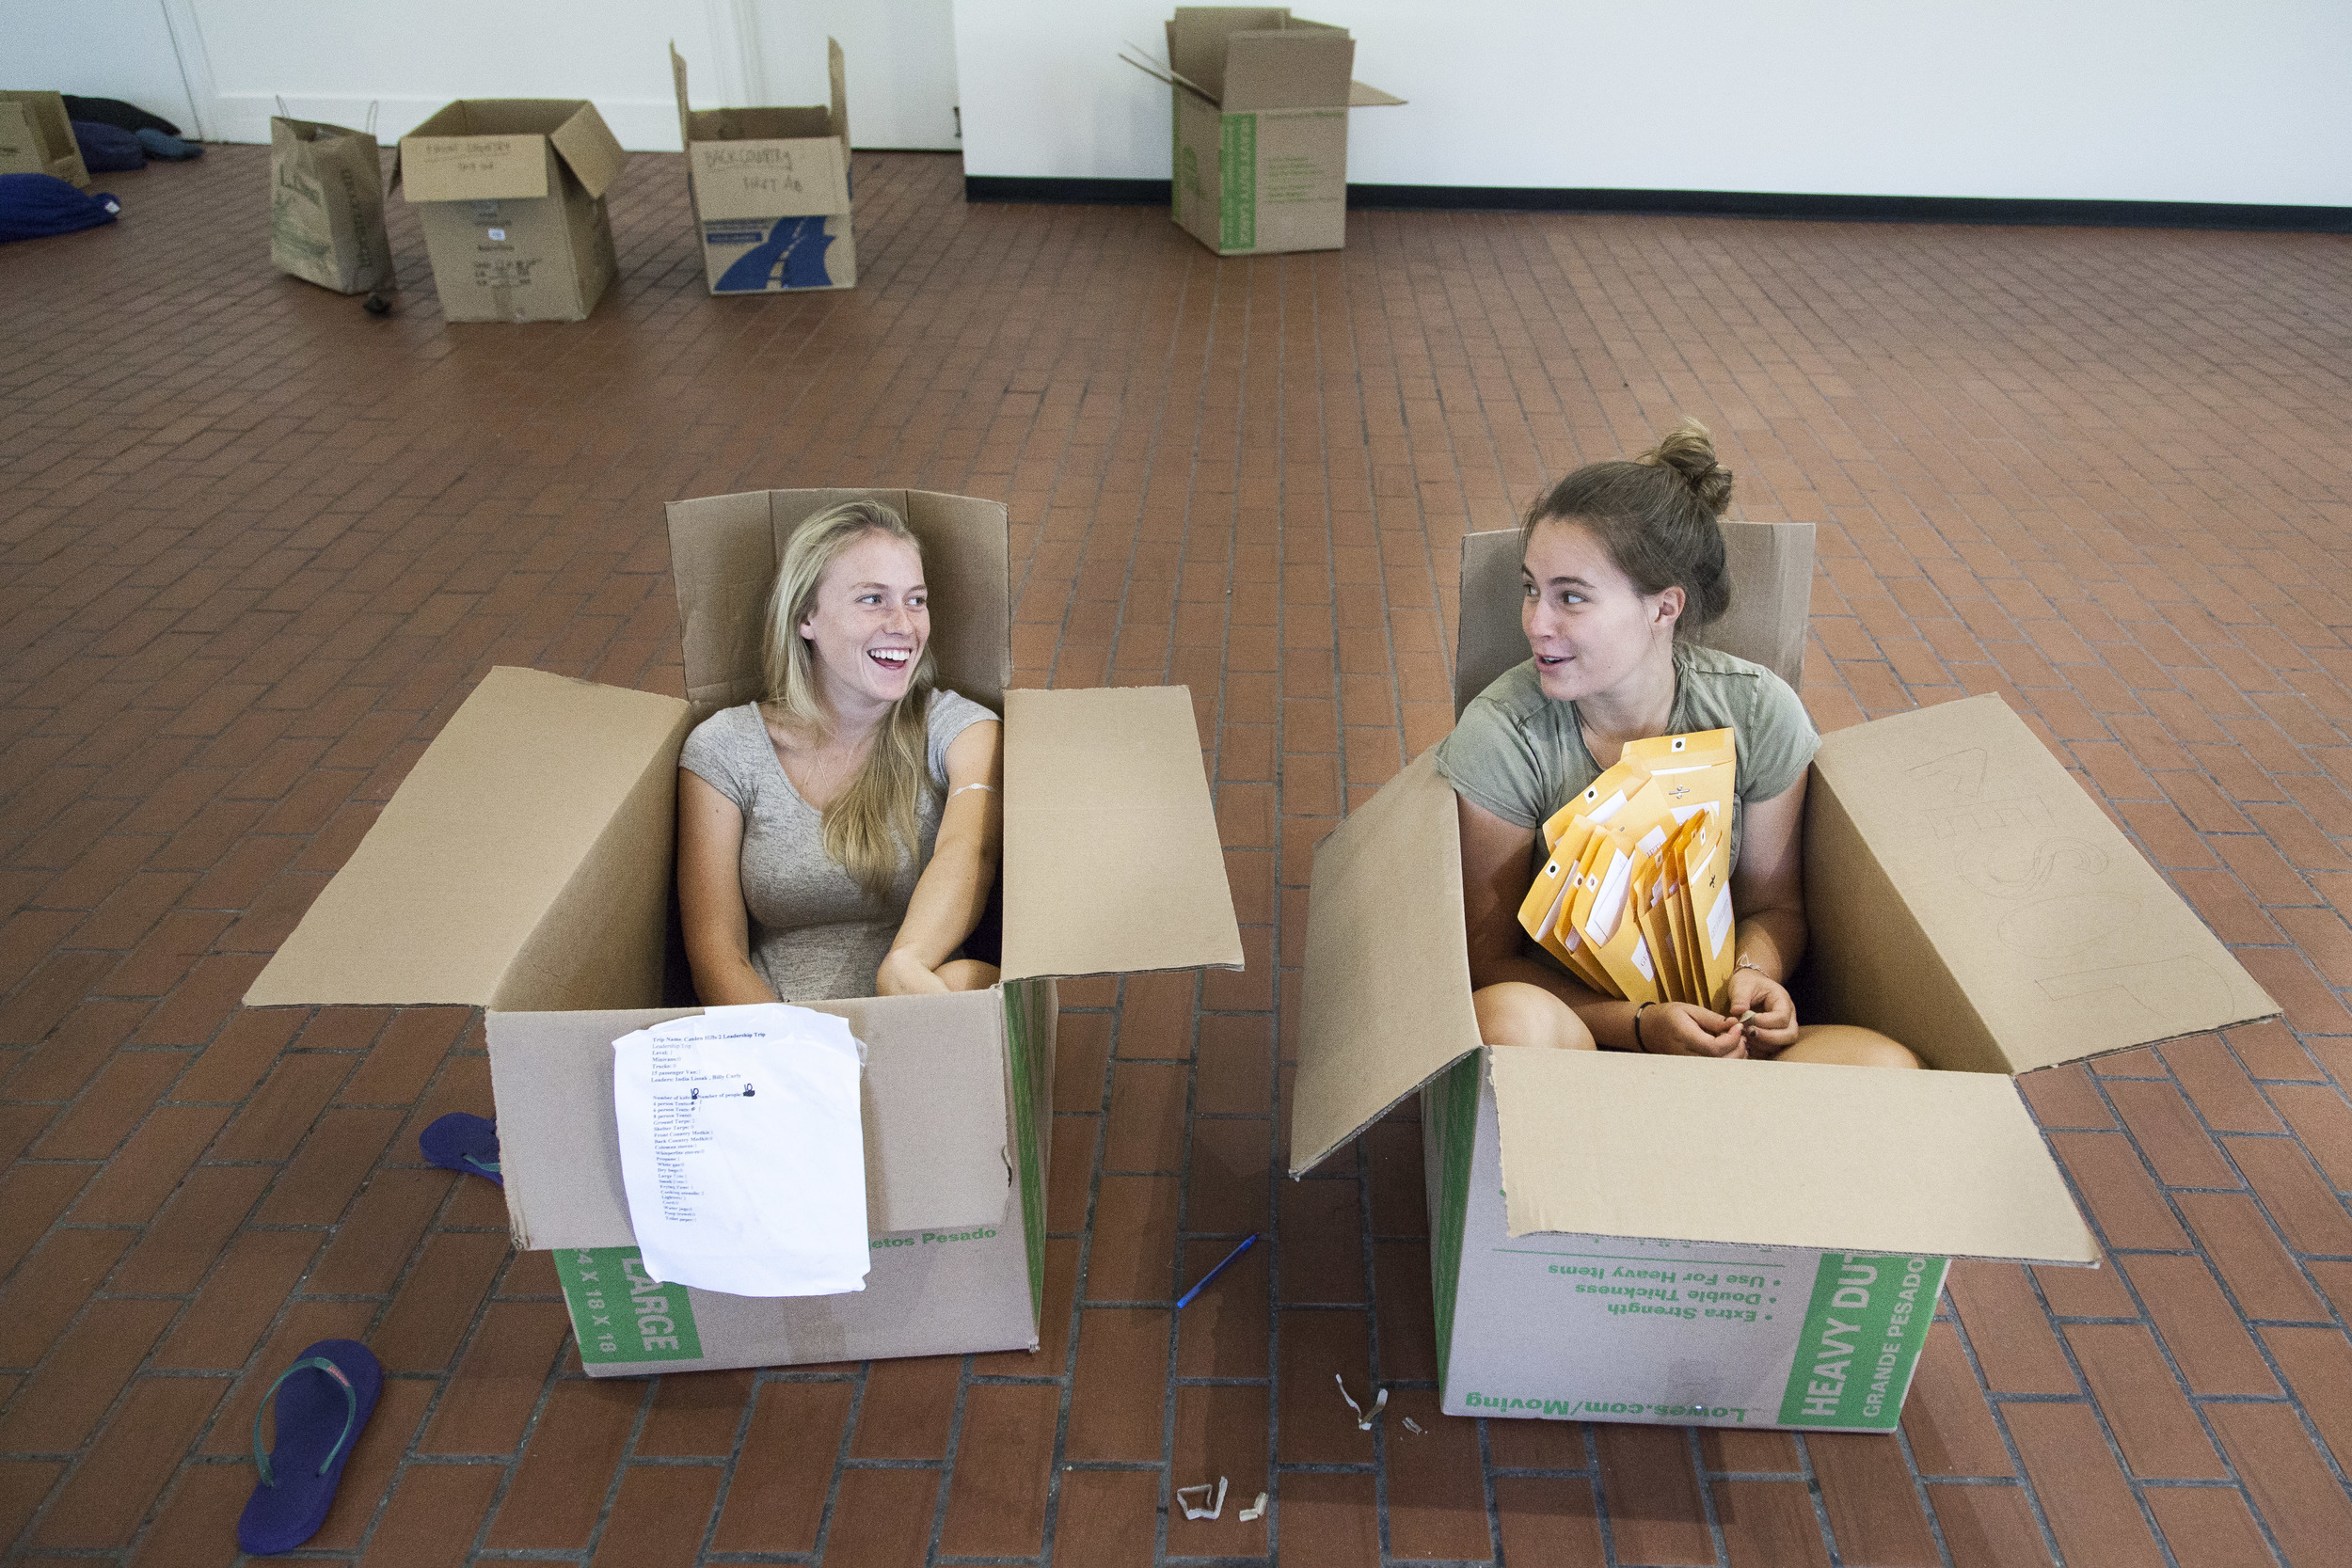  AESOP Coordinators Nat Silver '16 (L) of Bennington, Vermont and Sasha Lennon '16 (R) of Cape Elizabeth, Maine, find comfortable seating in which to distribute materials to trip leaders.    